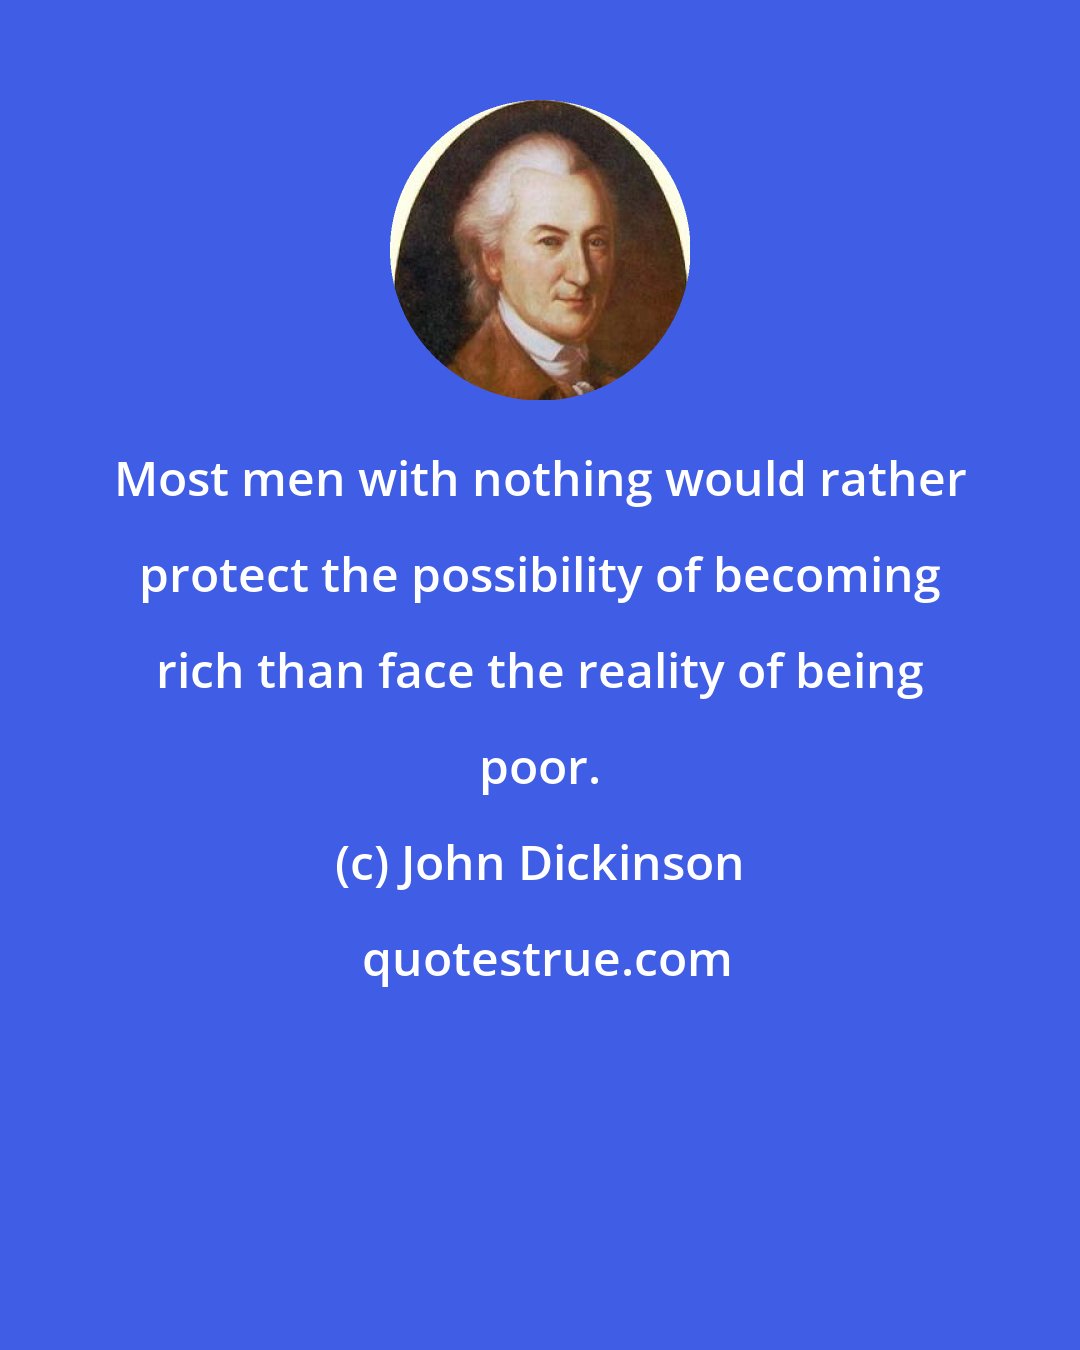 John Dickinson: Most men with nothing would rather protect the possibility of becoming rich than face the reality of being poor.